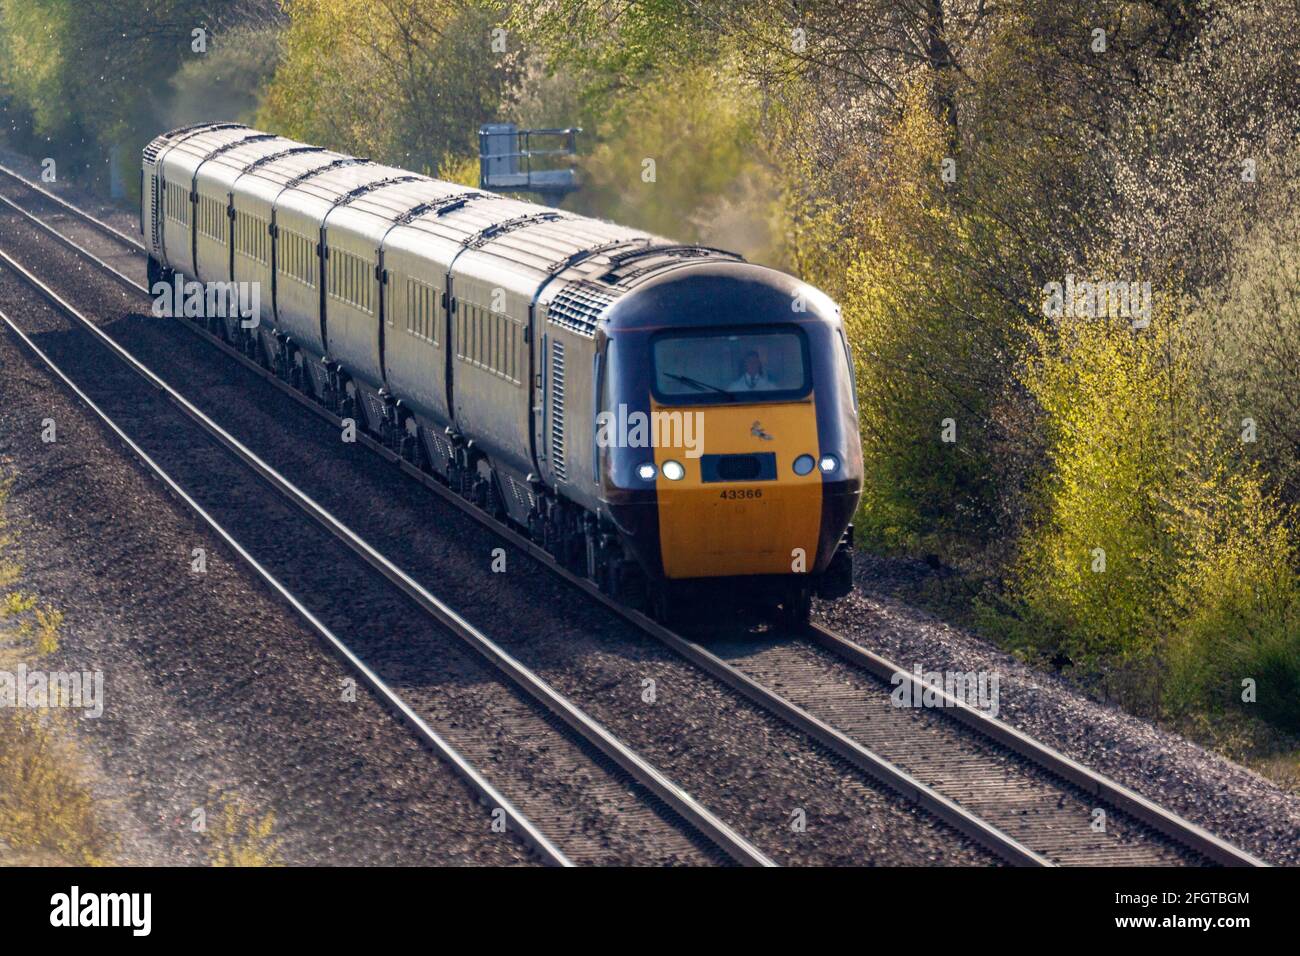 Willington. Derbyshire, UK, April,23,2021: A High Speed Diesel Train on a Passenger Express approaches North Stafford Junction near Derby, UK Stock Photo